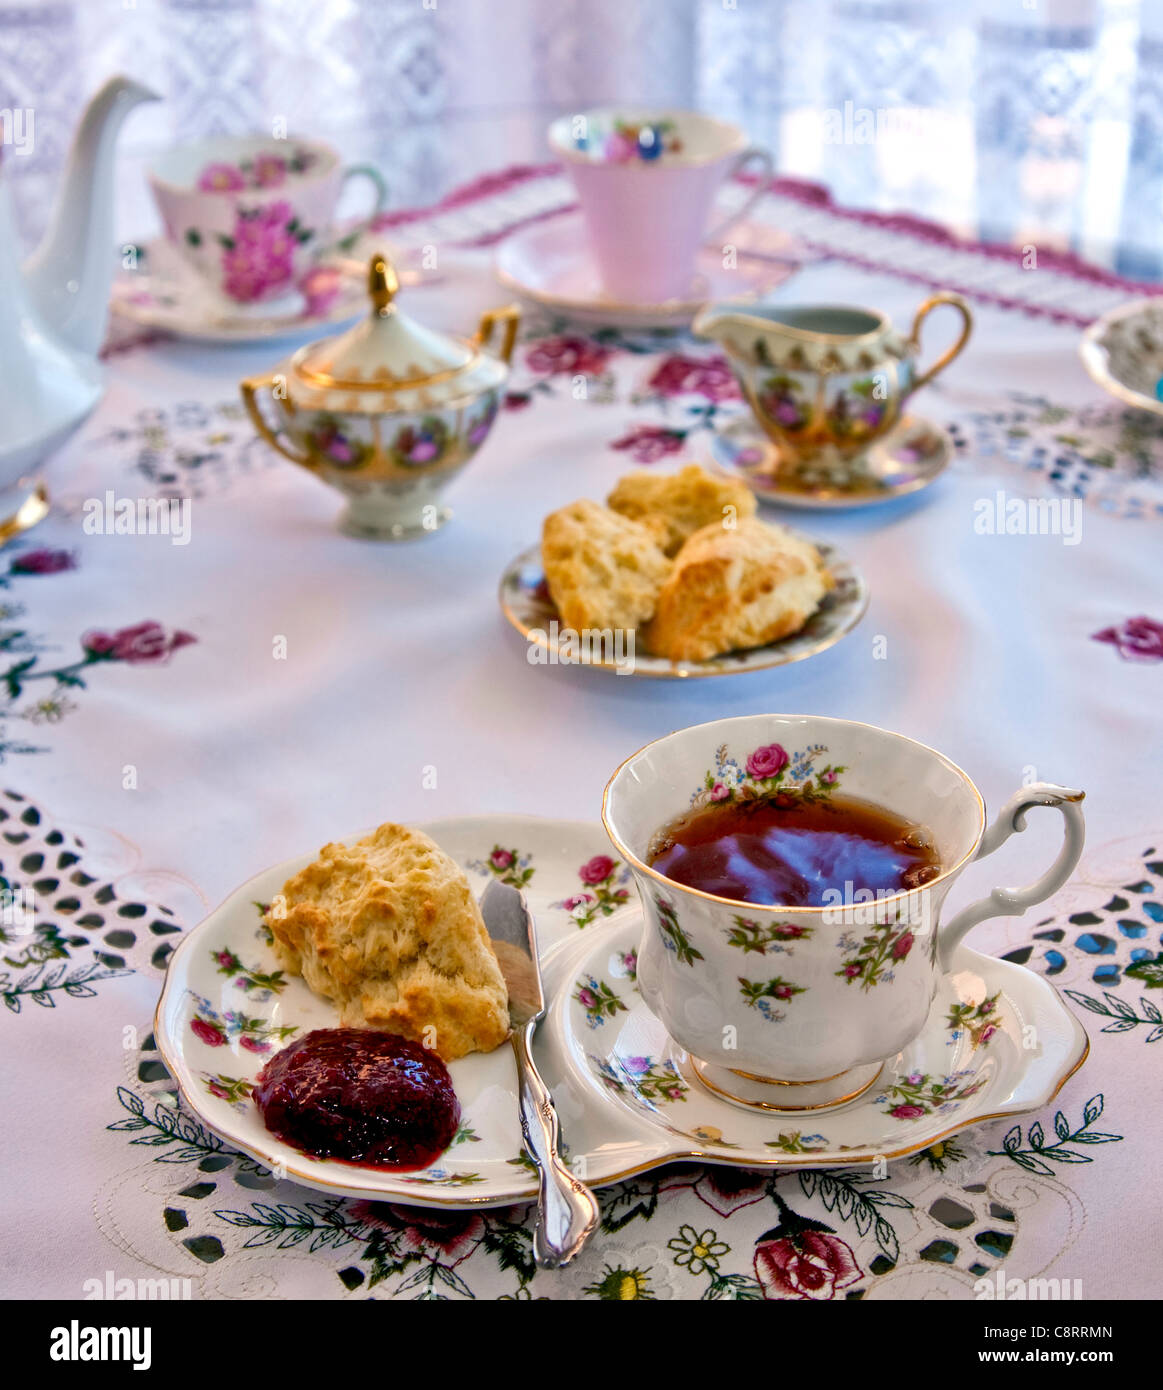 English High Tea with scones and Jam at a table setting Stock Photo